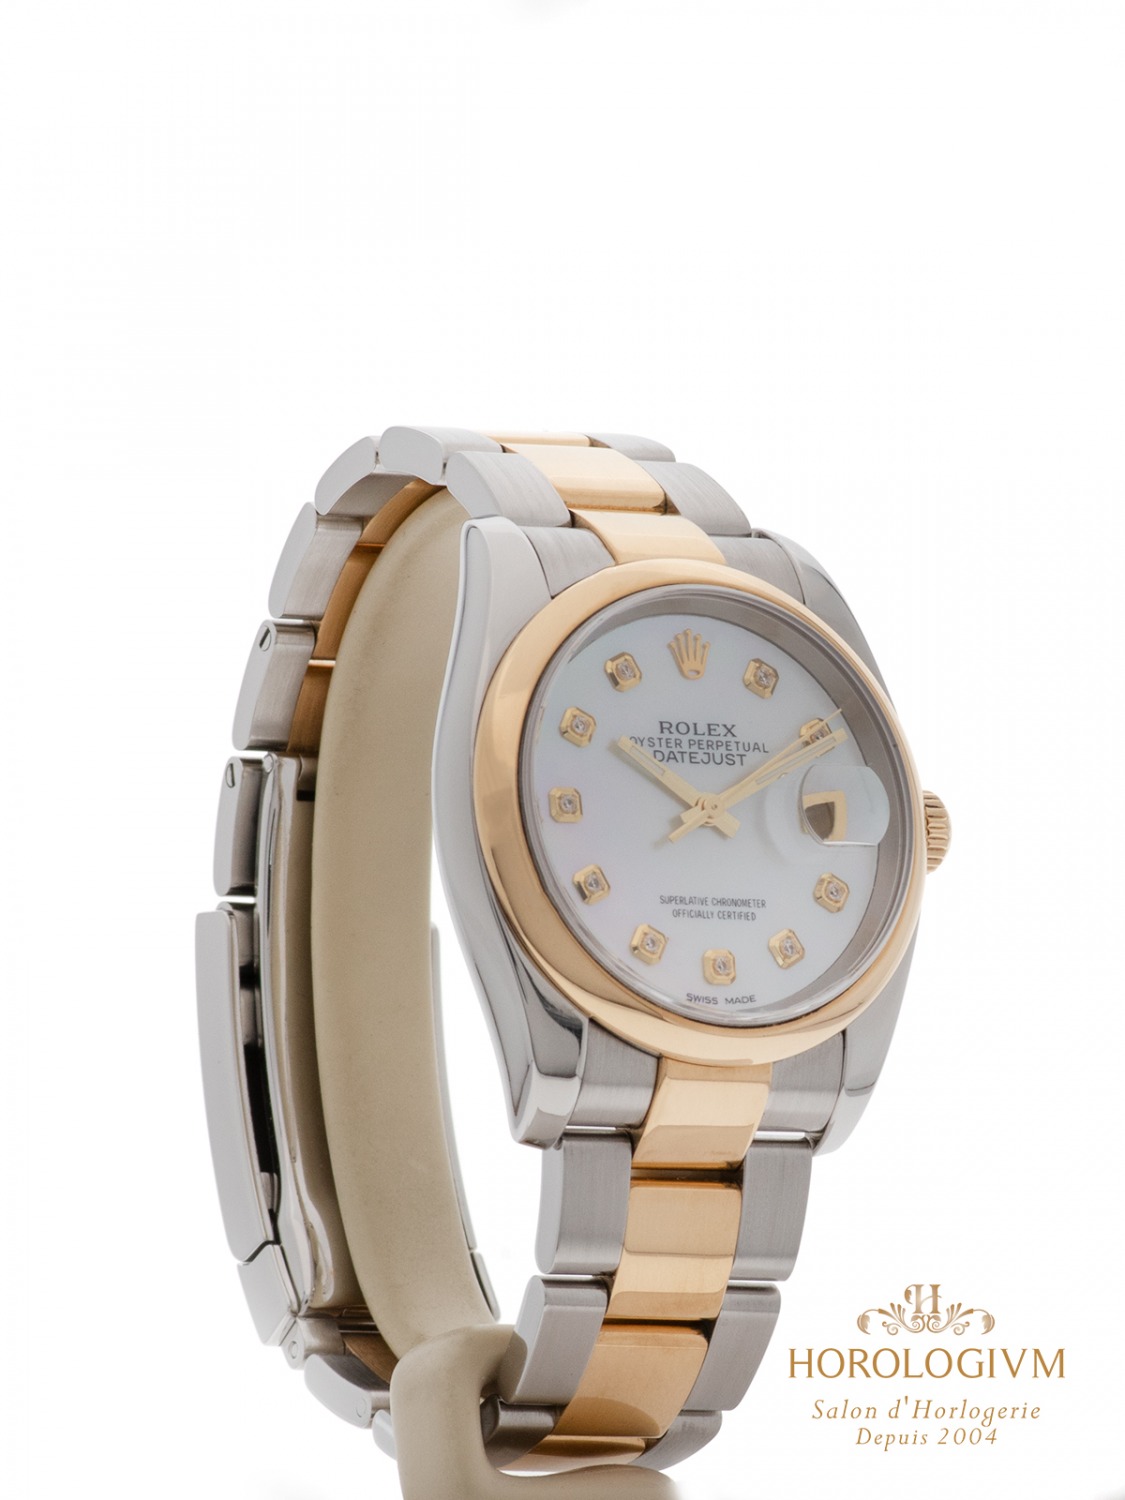 Rolex Datejust 36MM with diamonds Ref 116203 watch,  two-tone (bi-colored) silver & yellow gold (case) and yellow gold (bezel)